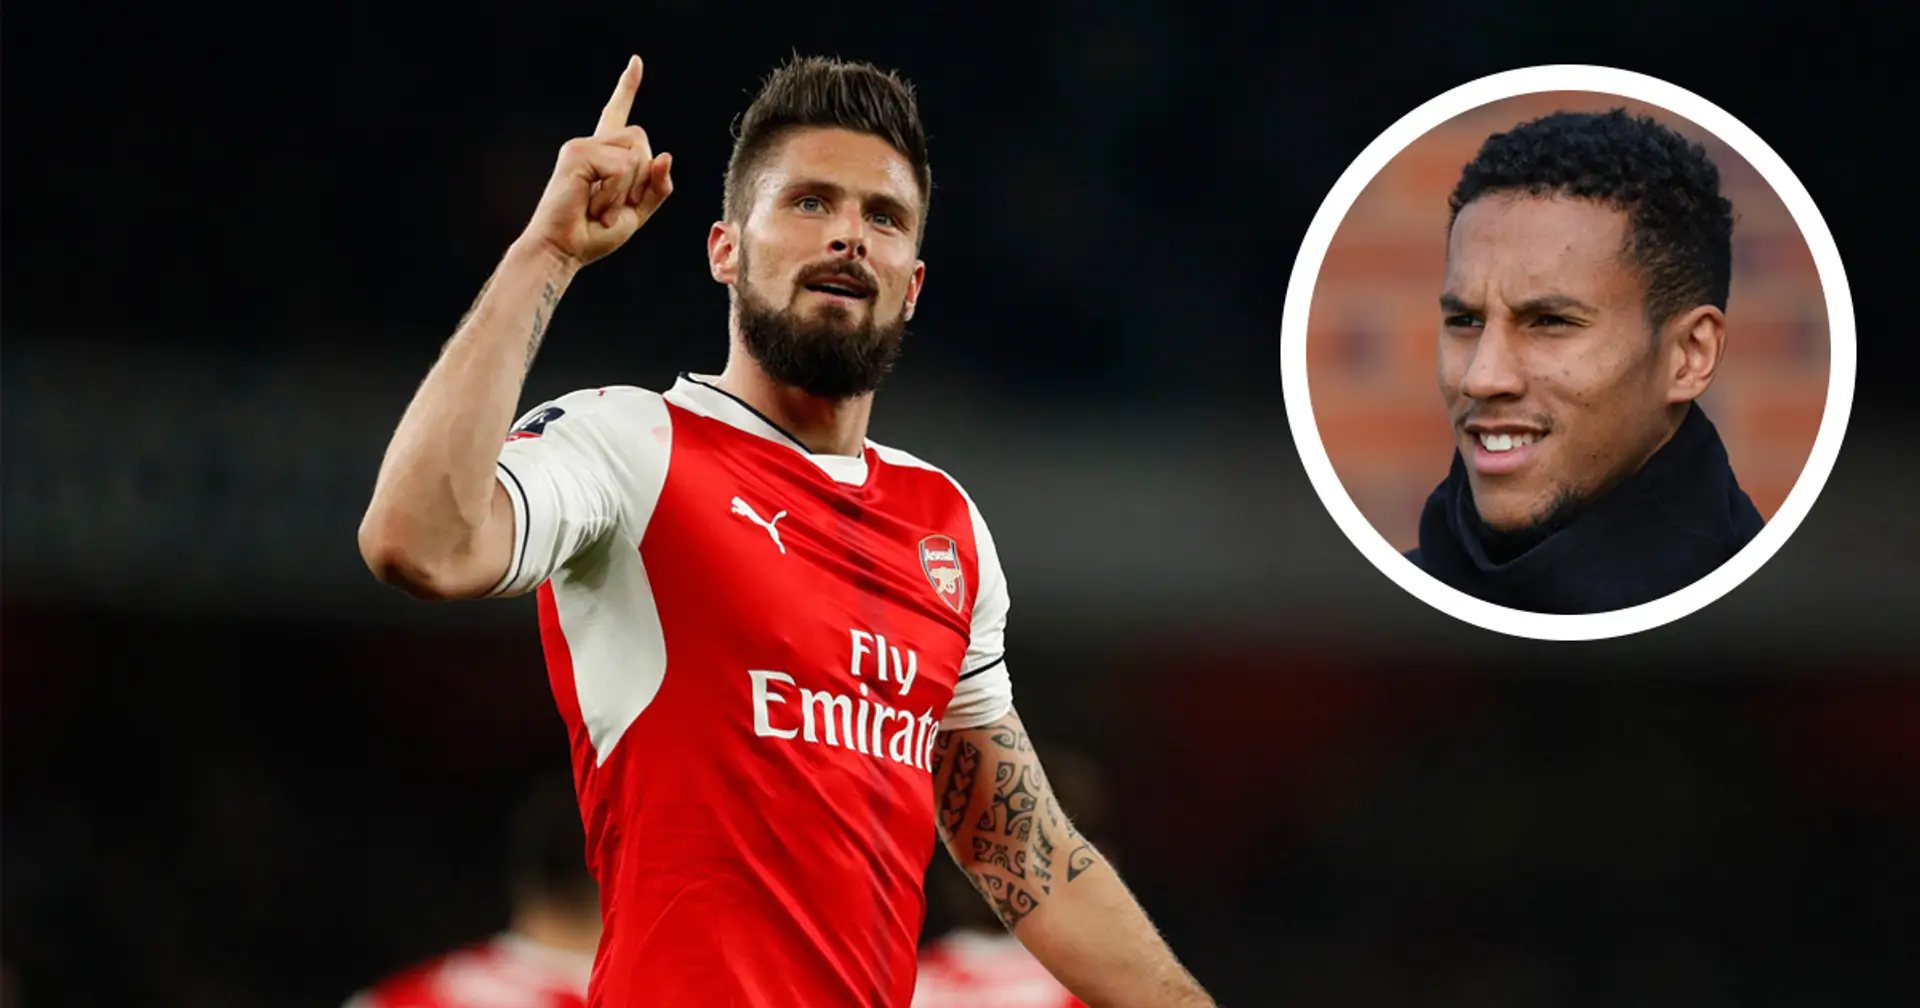 Ex-Gunner Isaac Hayden asked to pick 5-a-side team, goes for Olivier Giroud up top